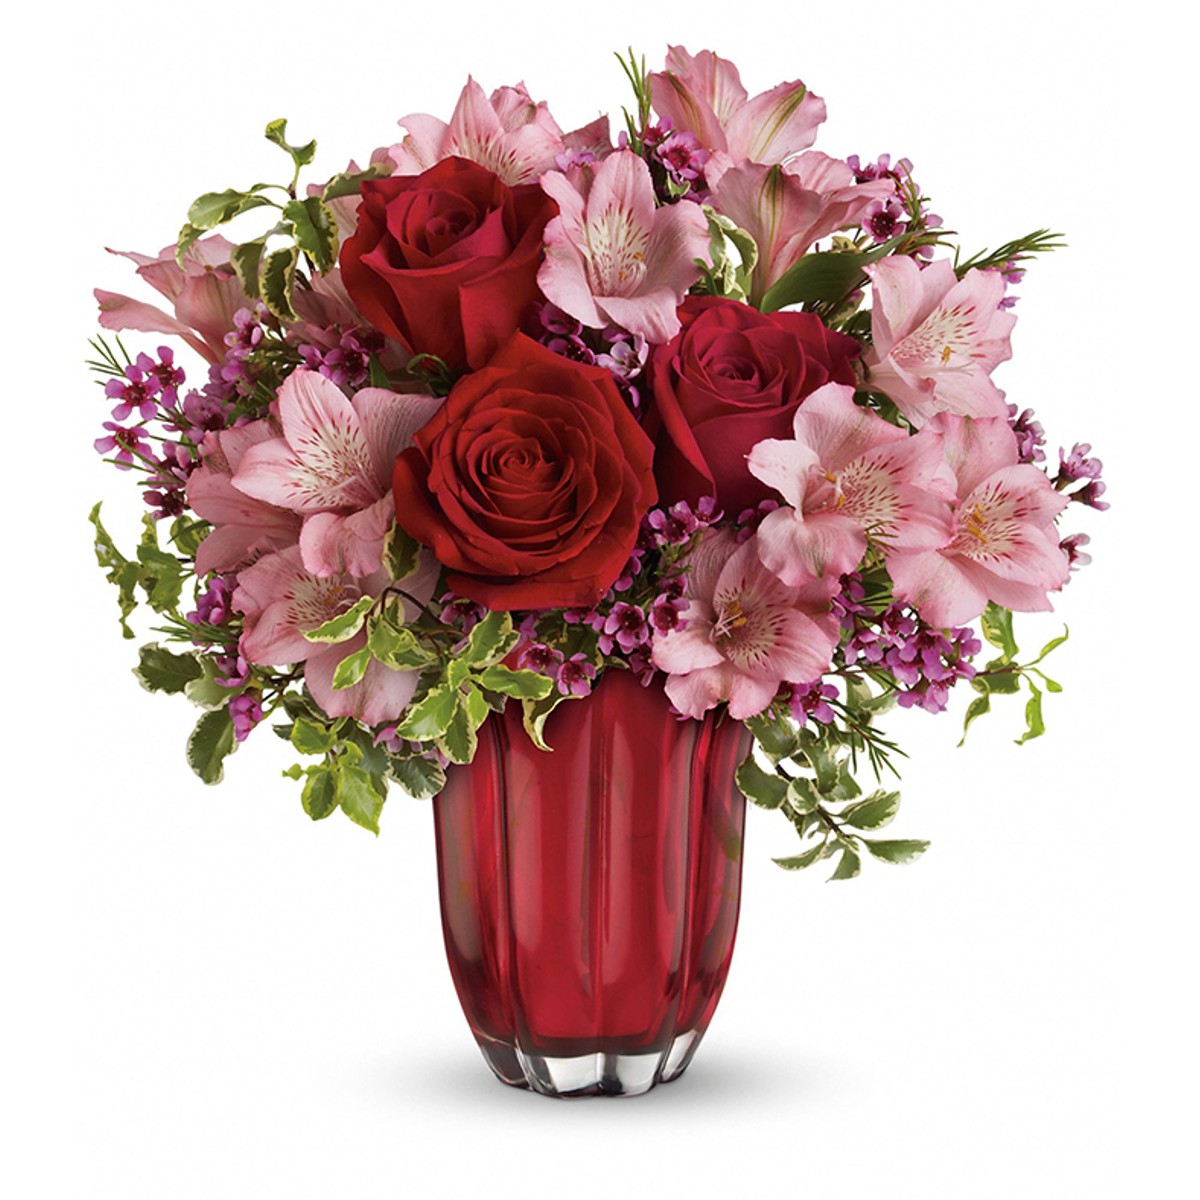 Pink Butterfly Bouquet by Teleflora